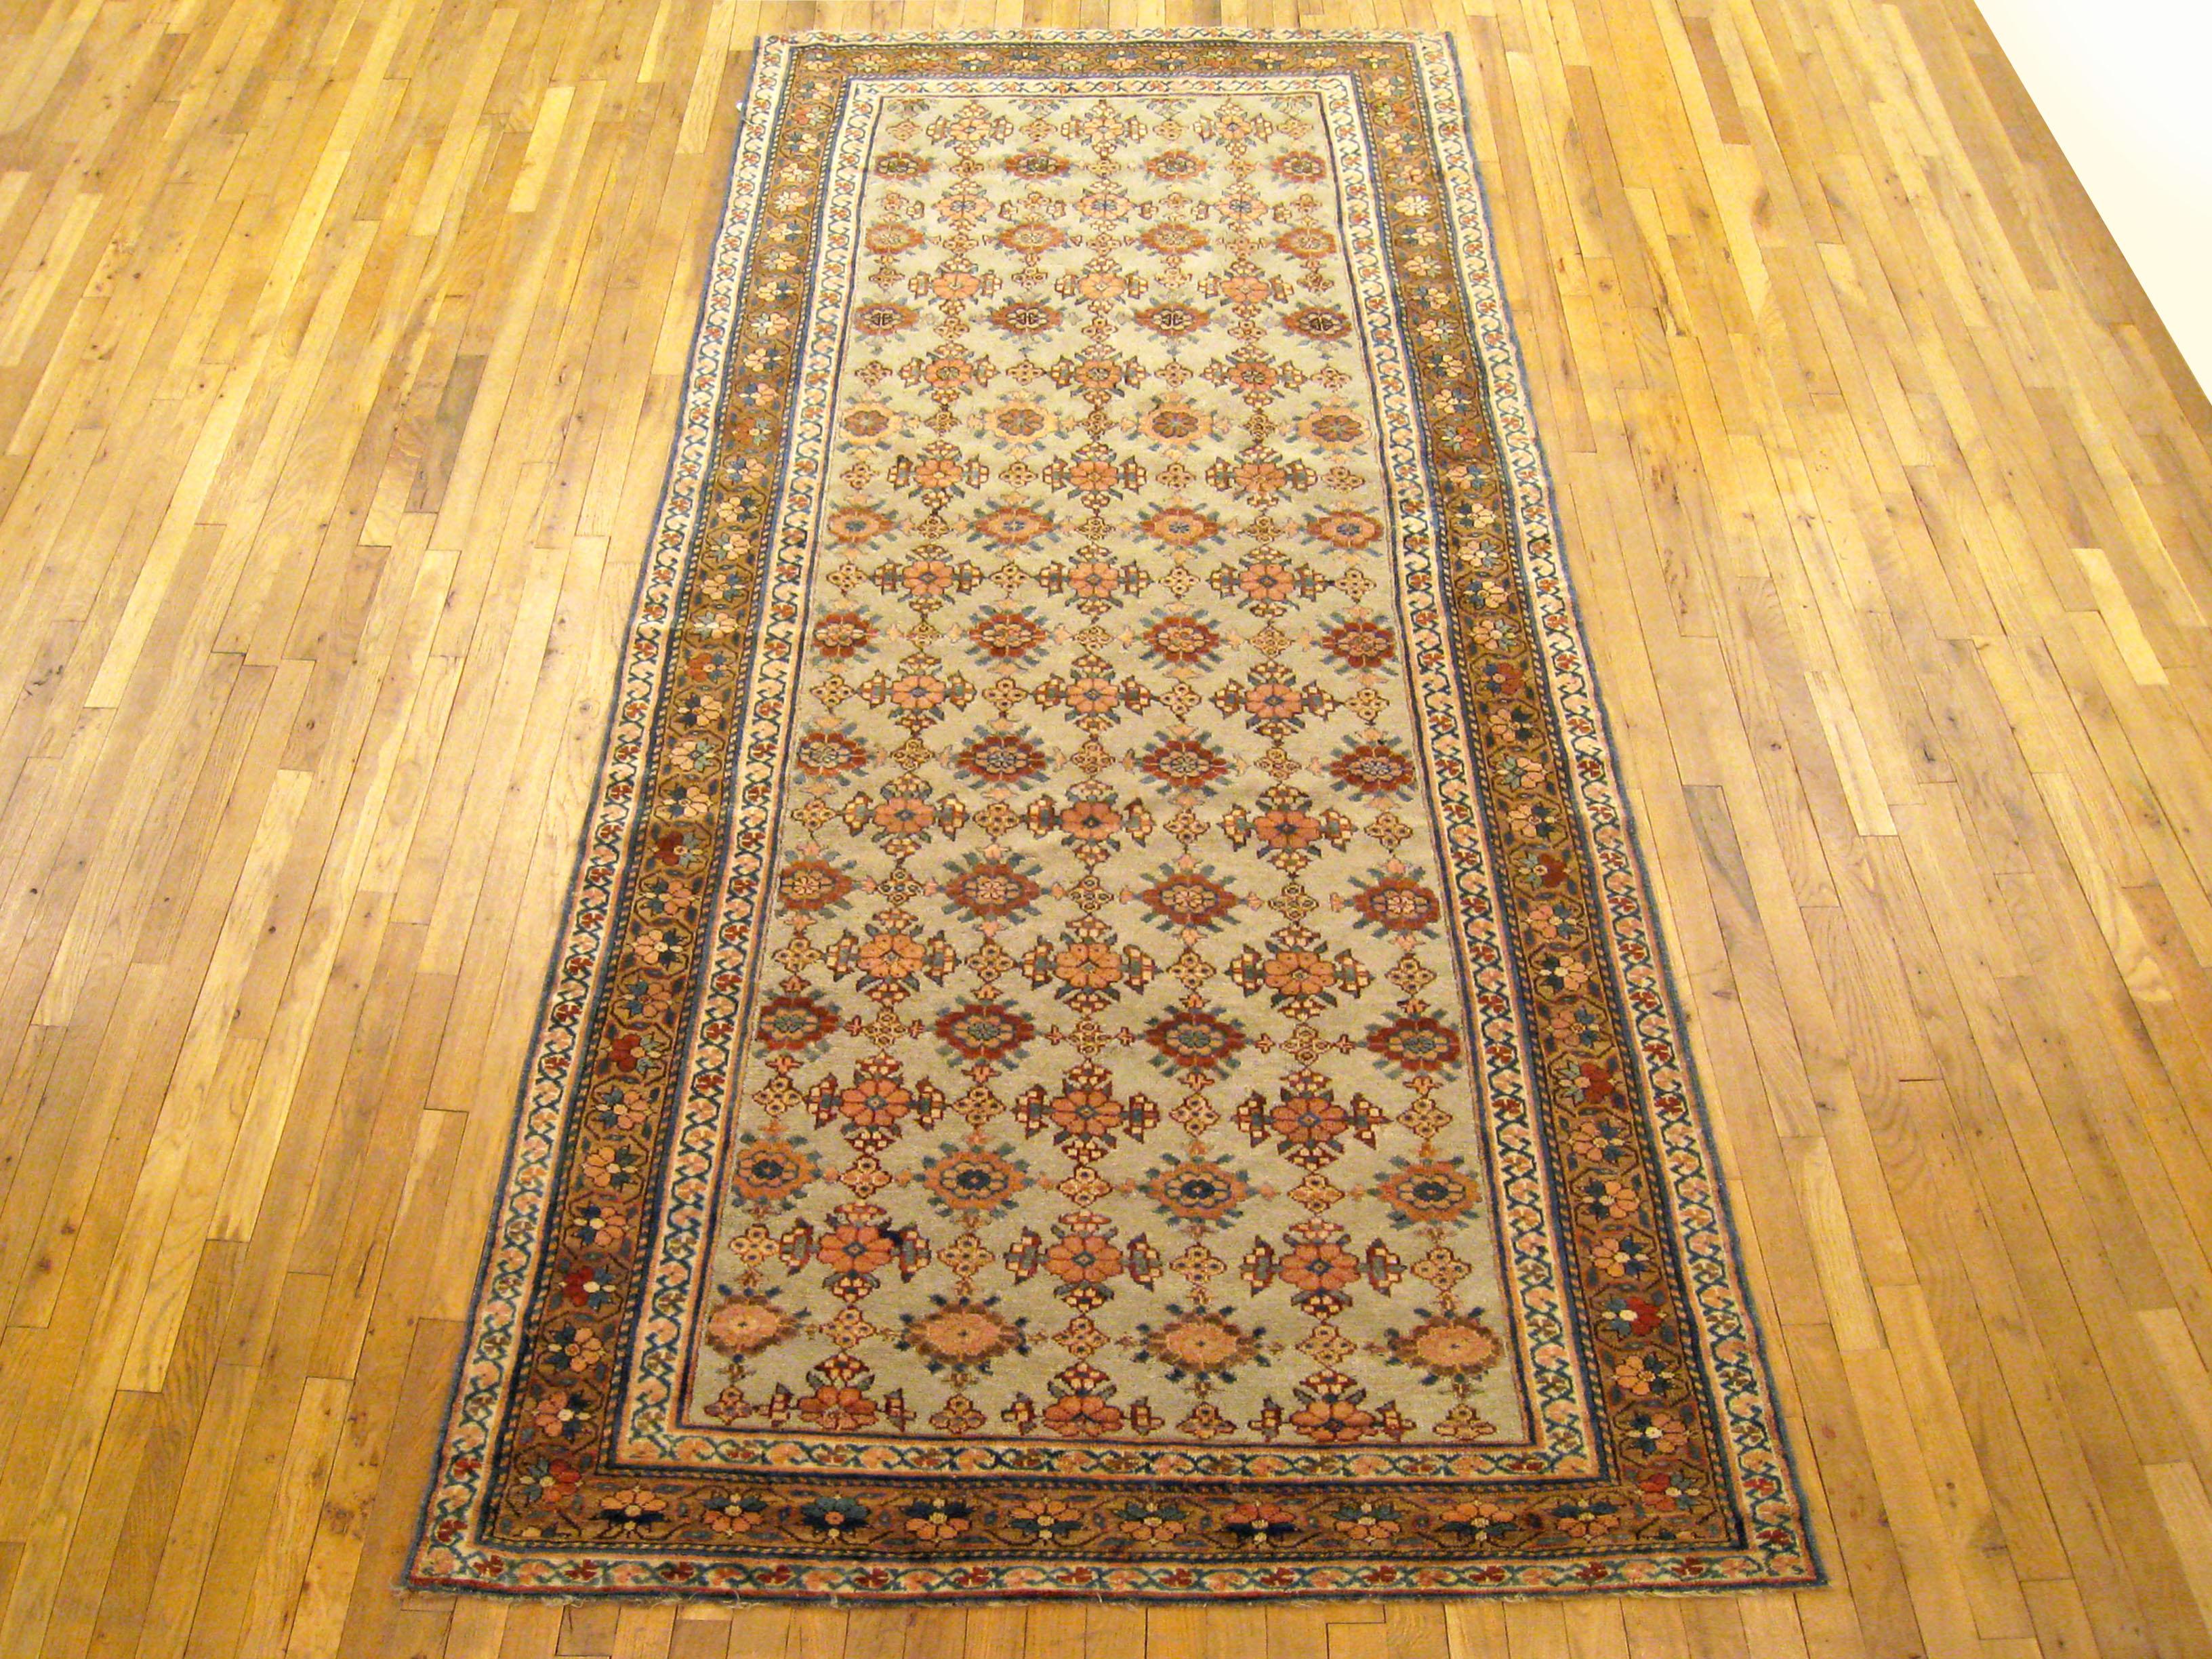 Antique Persian Kurd rug, Gallery size, circa 1920

A one-of-a-kind vintage Persian Kurd Oriental Carpet, hand-knotted with soft wool pile. This lovely hand-knotted rug features rosettes design allover the blue primary field, with a light brown